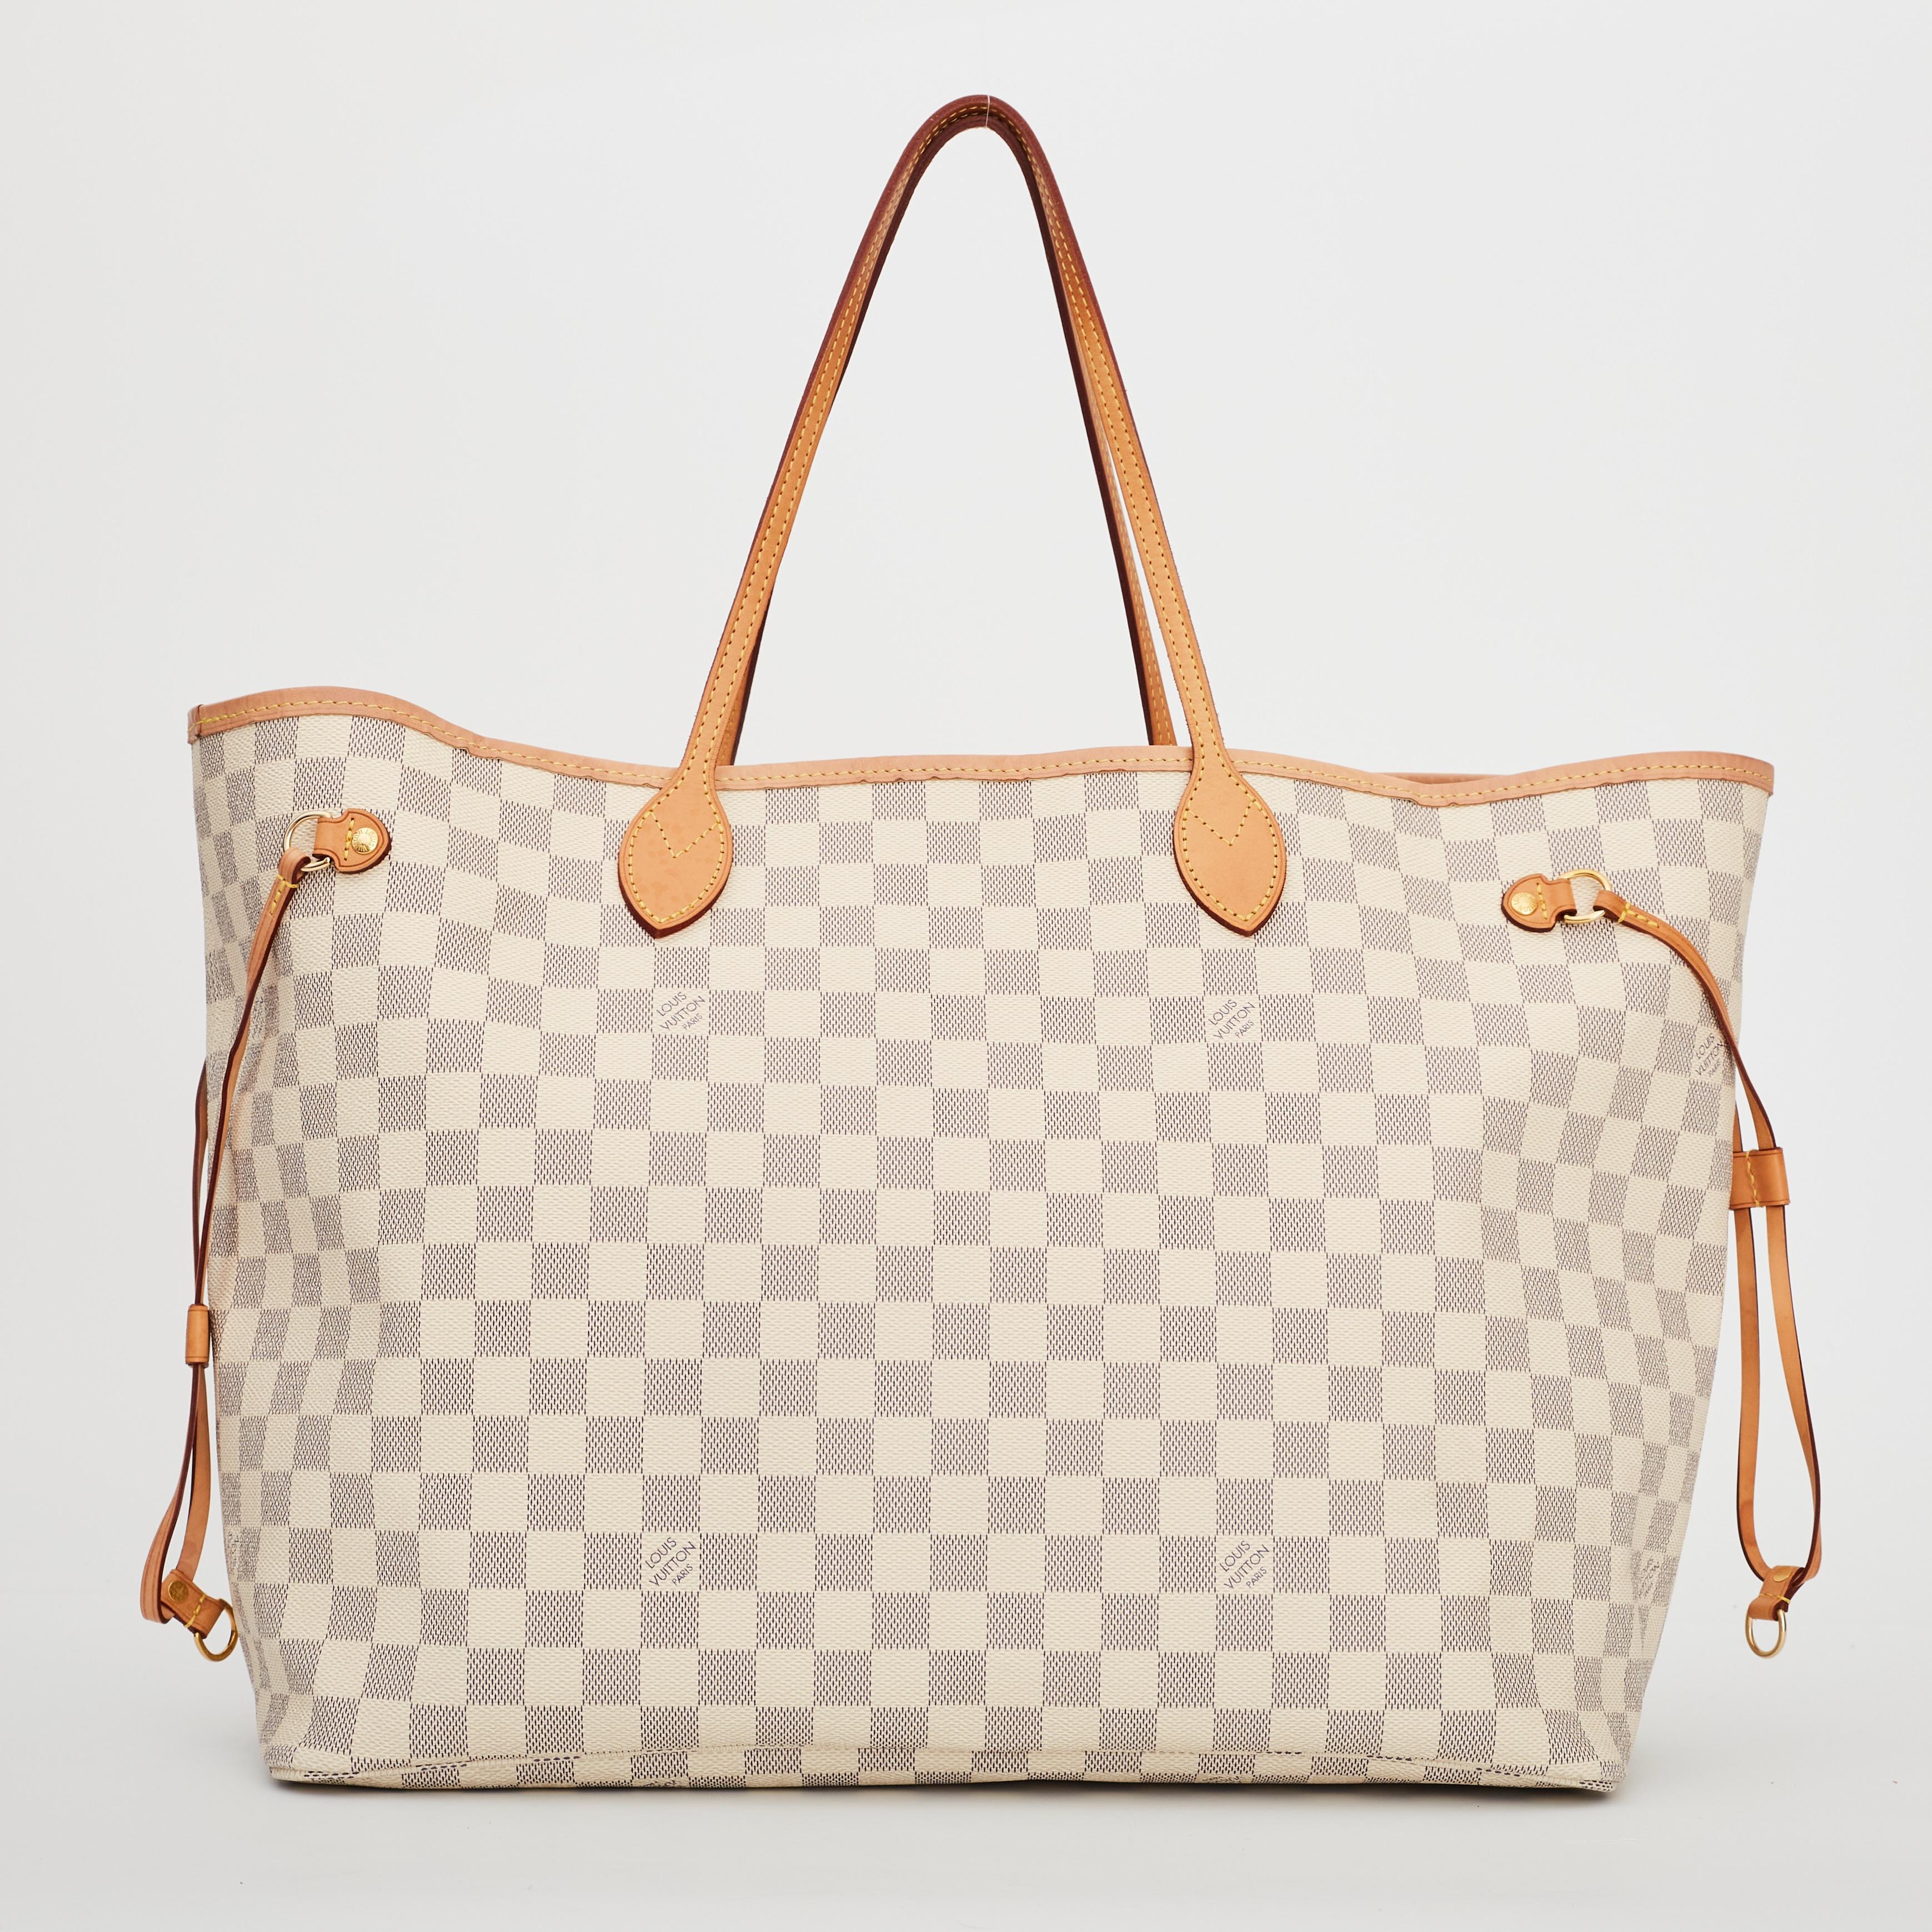 This tote is made of Louis Vuitton signature damier canvas in light azure blue in the medium size. The bag features vachetta cowhide leather strap handles, trim and side cinch cords with polished brass hardware. The top is wide and open to a striped